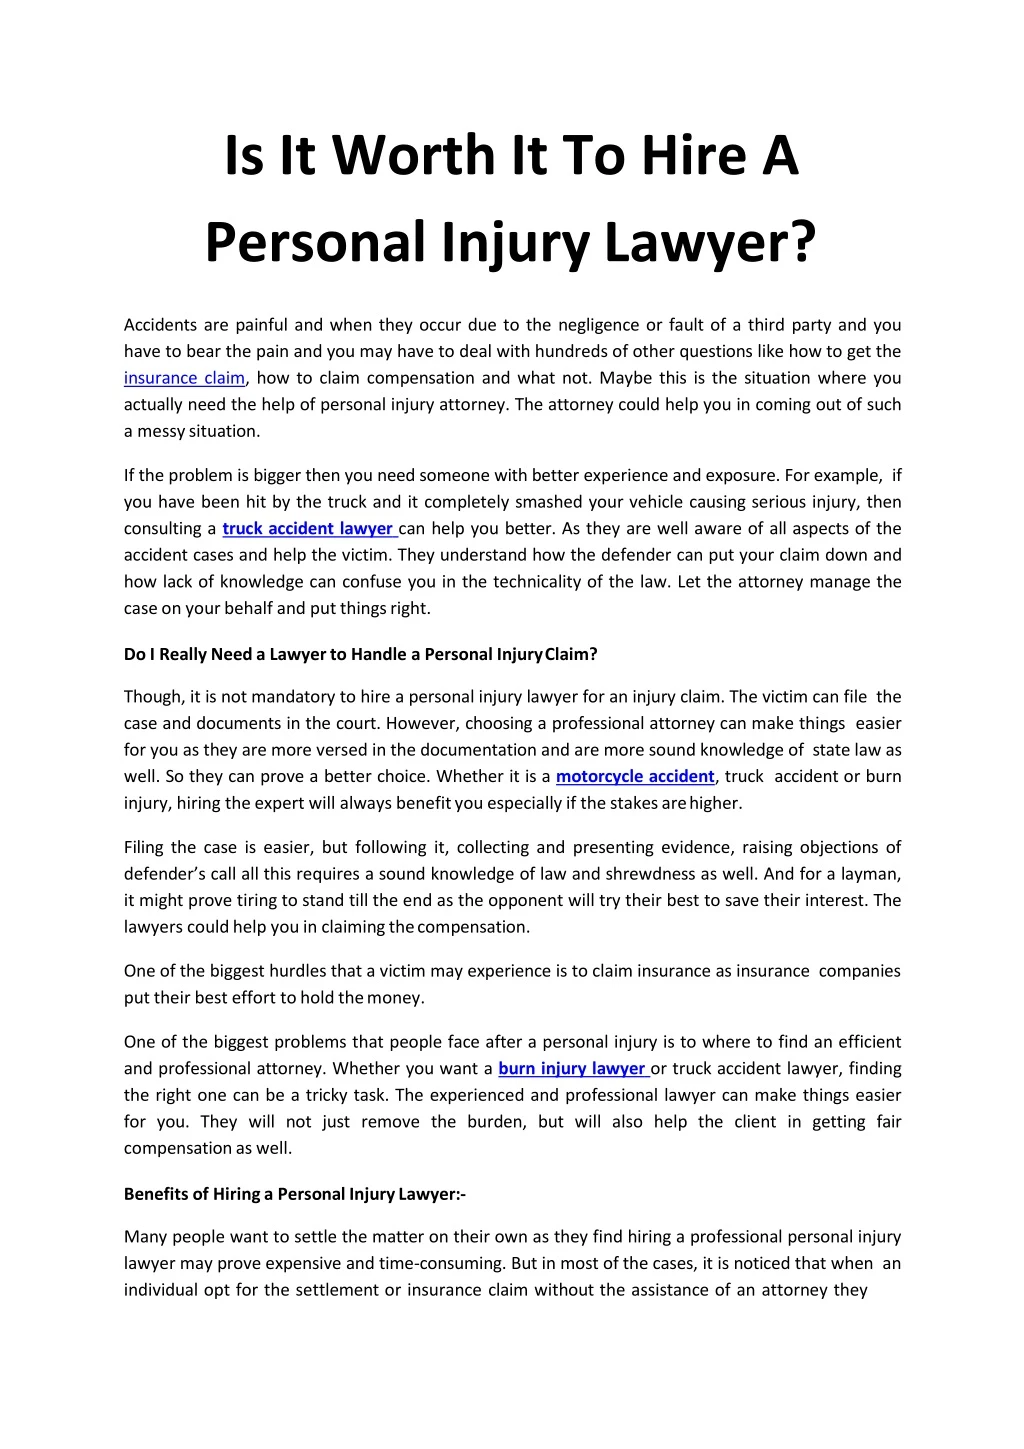 is it worth it to hire a personal injury lawyer